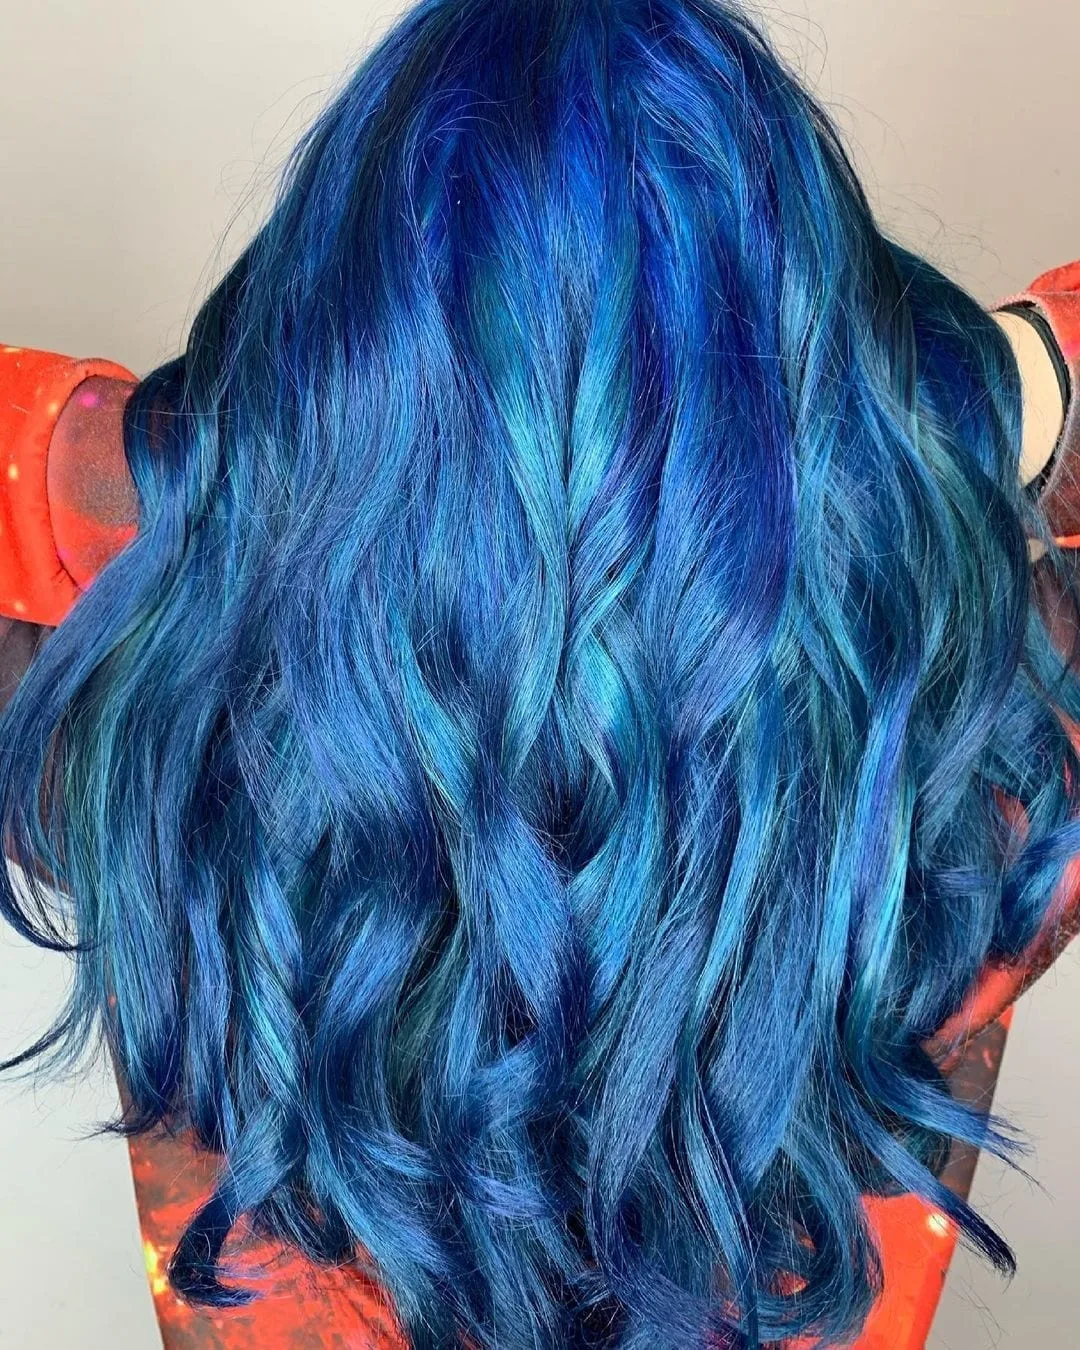 Woman with blue hair holds her hands on the top of her head